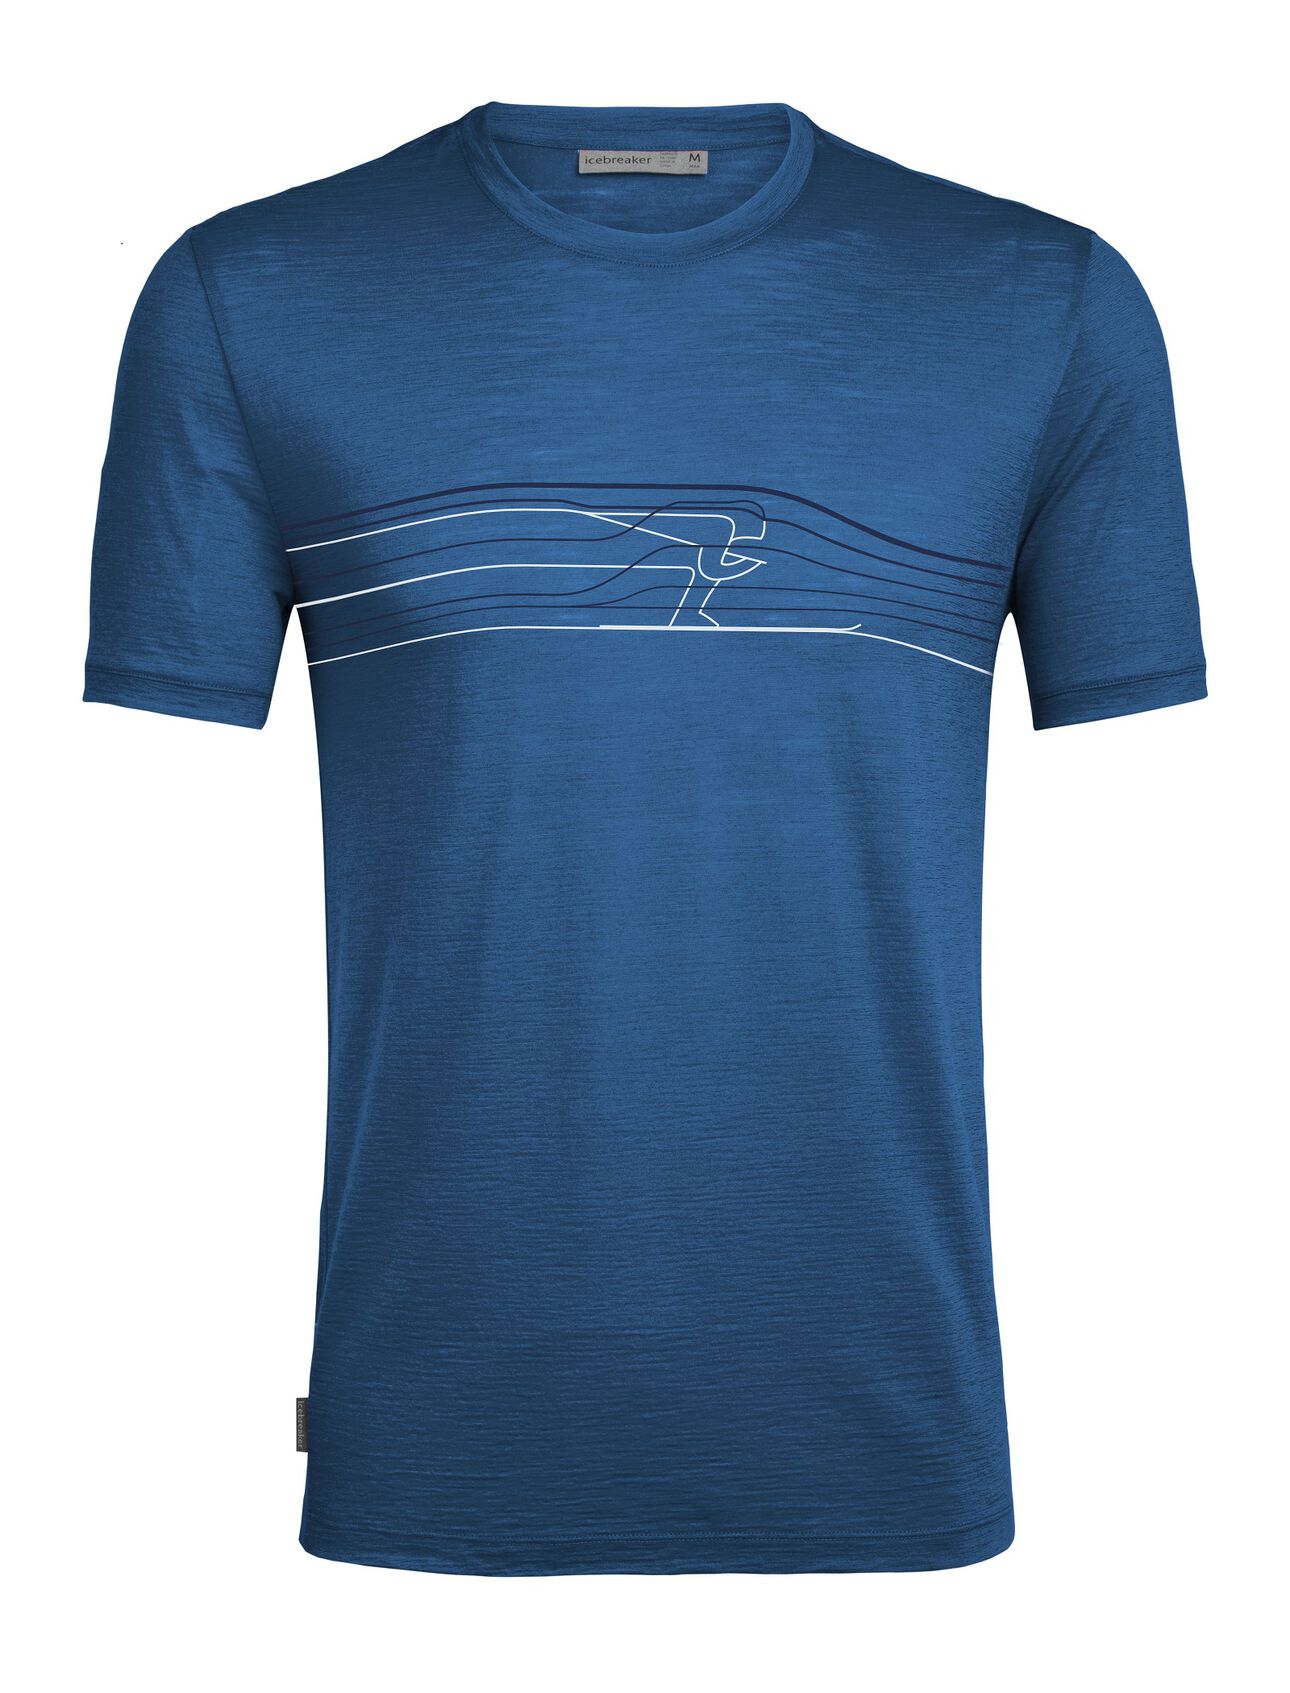 dla mężczyzn Merino Spector Short Sleeve Crewe T-Shirt Ski Racer A lightweight, breathable, and versatile merino wool T-shirt ideal for everything from hiking to travel, our Spector Short Sleeve Crewe Ski Racer is a go-to for any and every day.